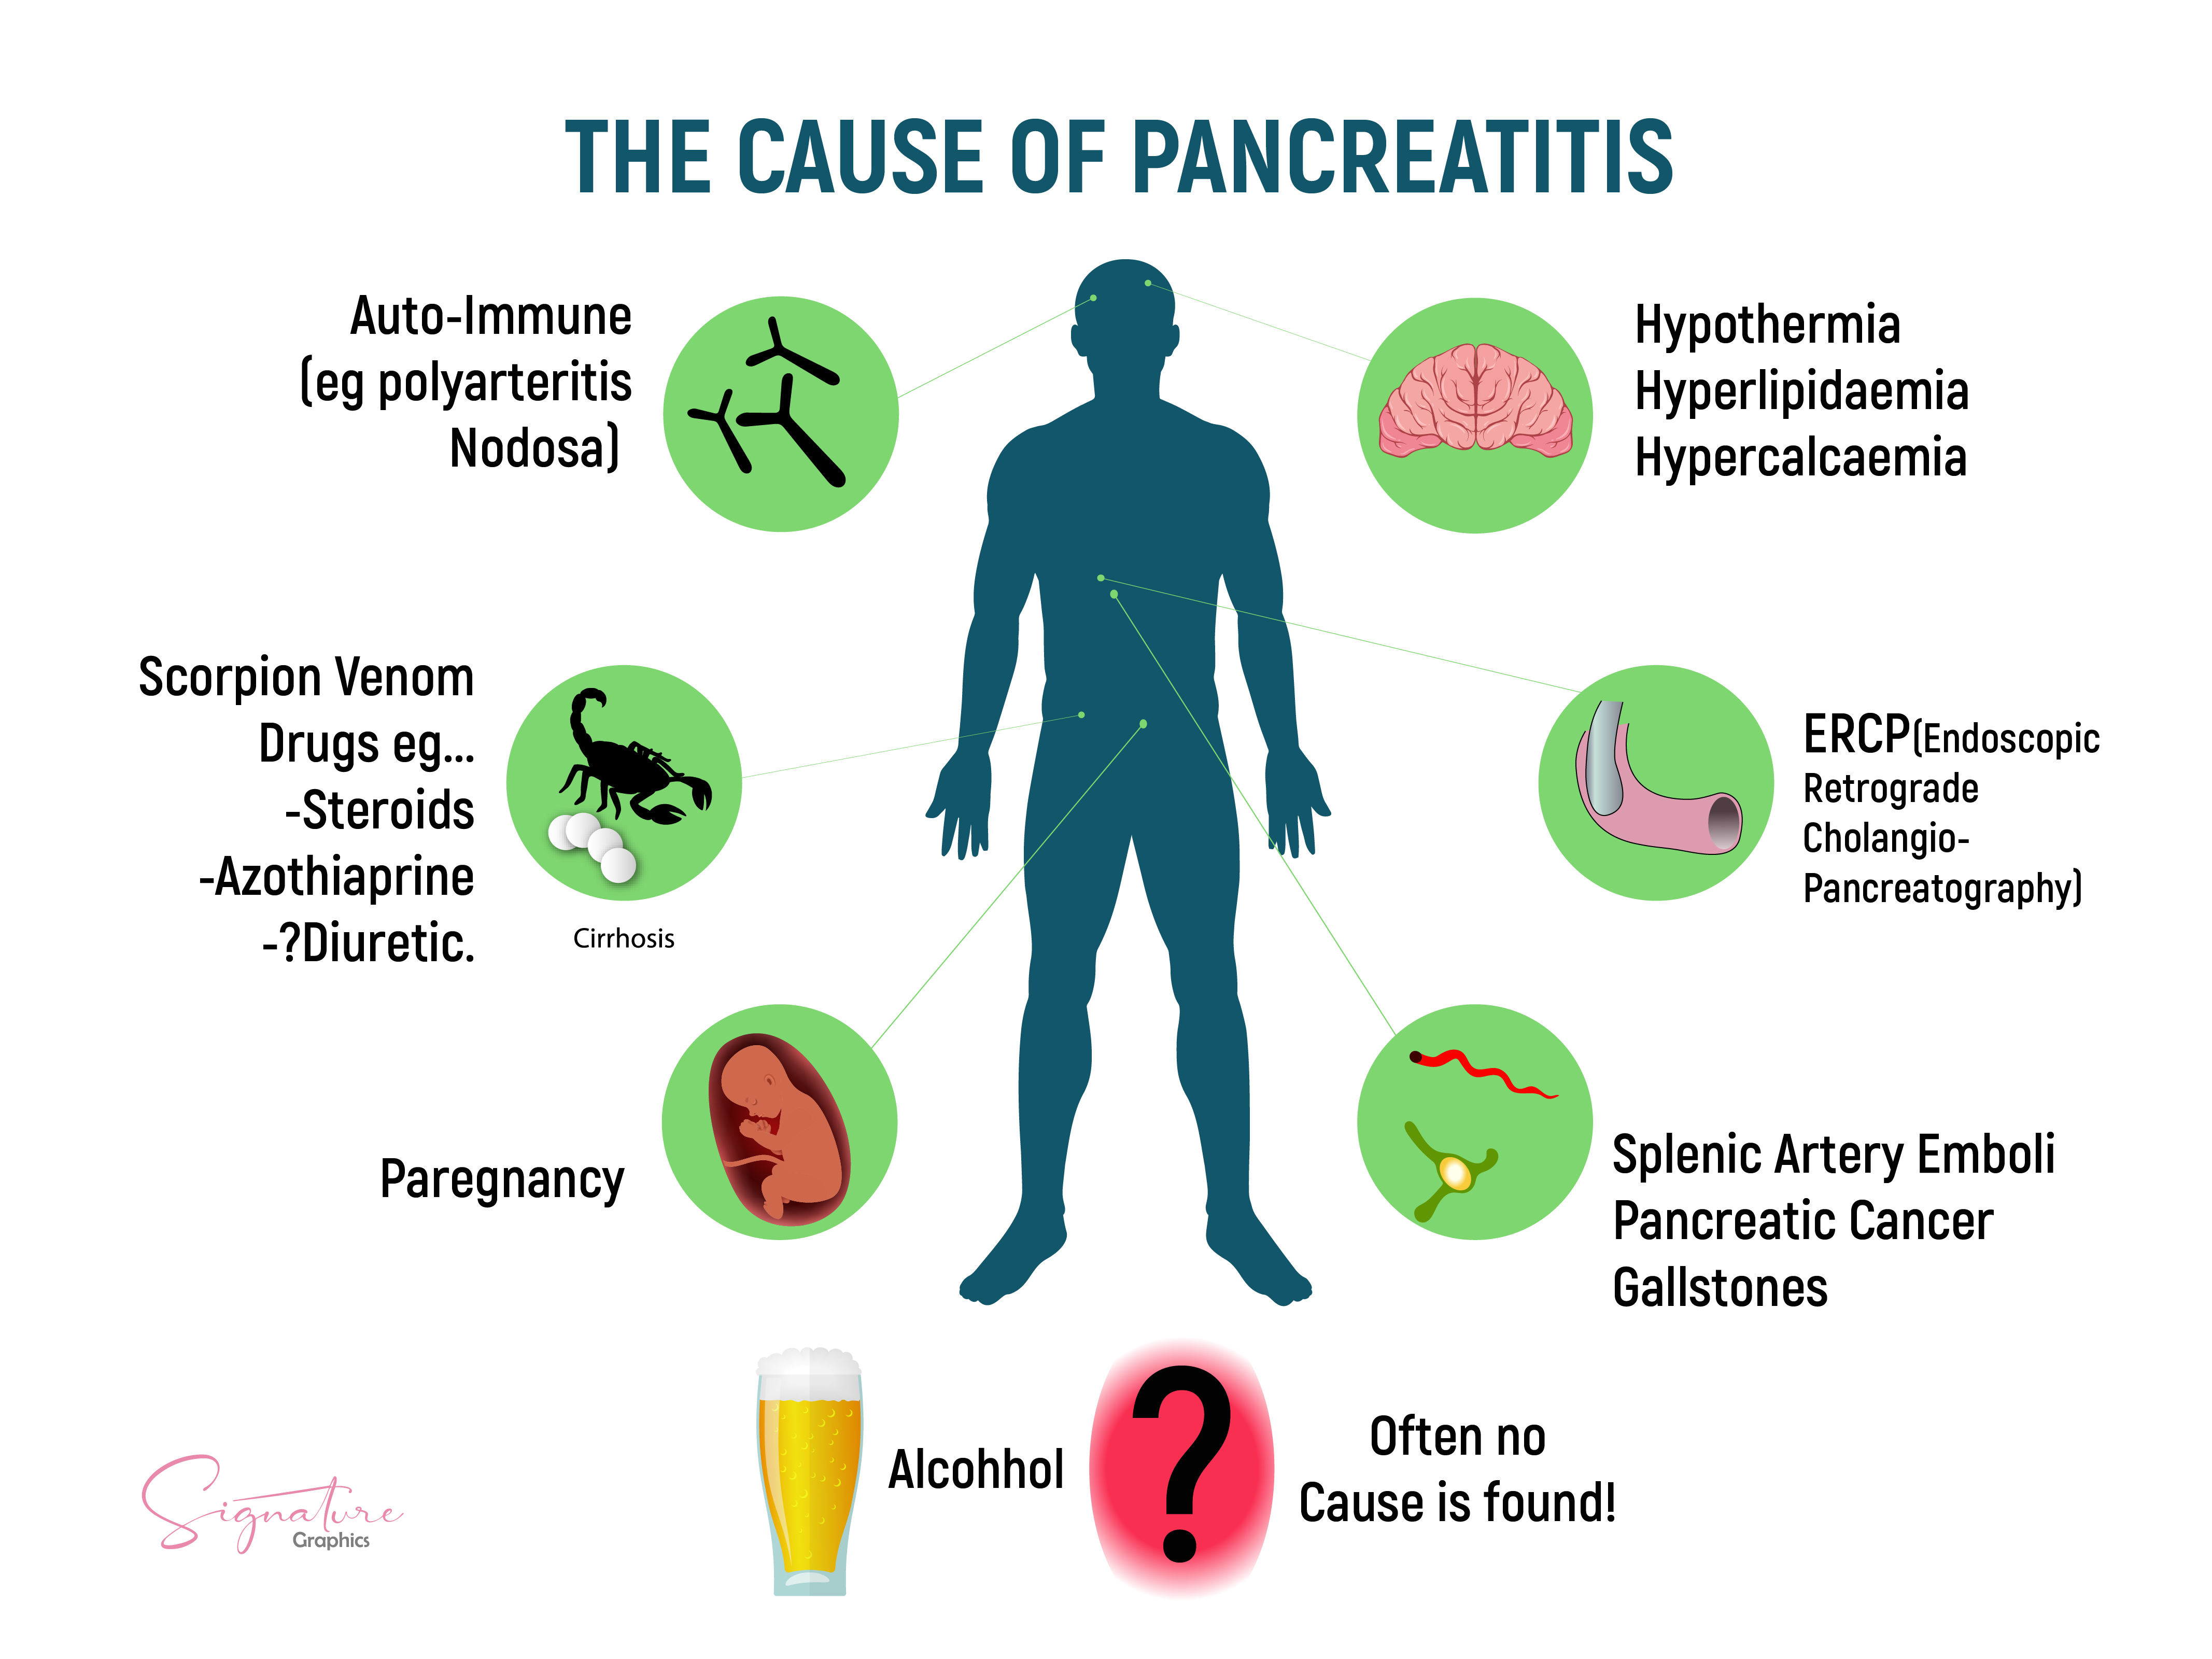 This is a graphic illustration of the causes of acute pancreatitis.